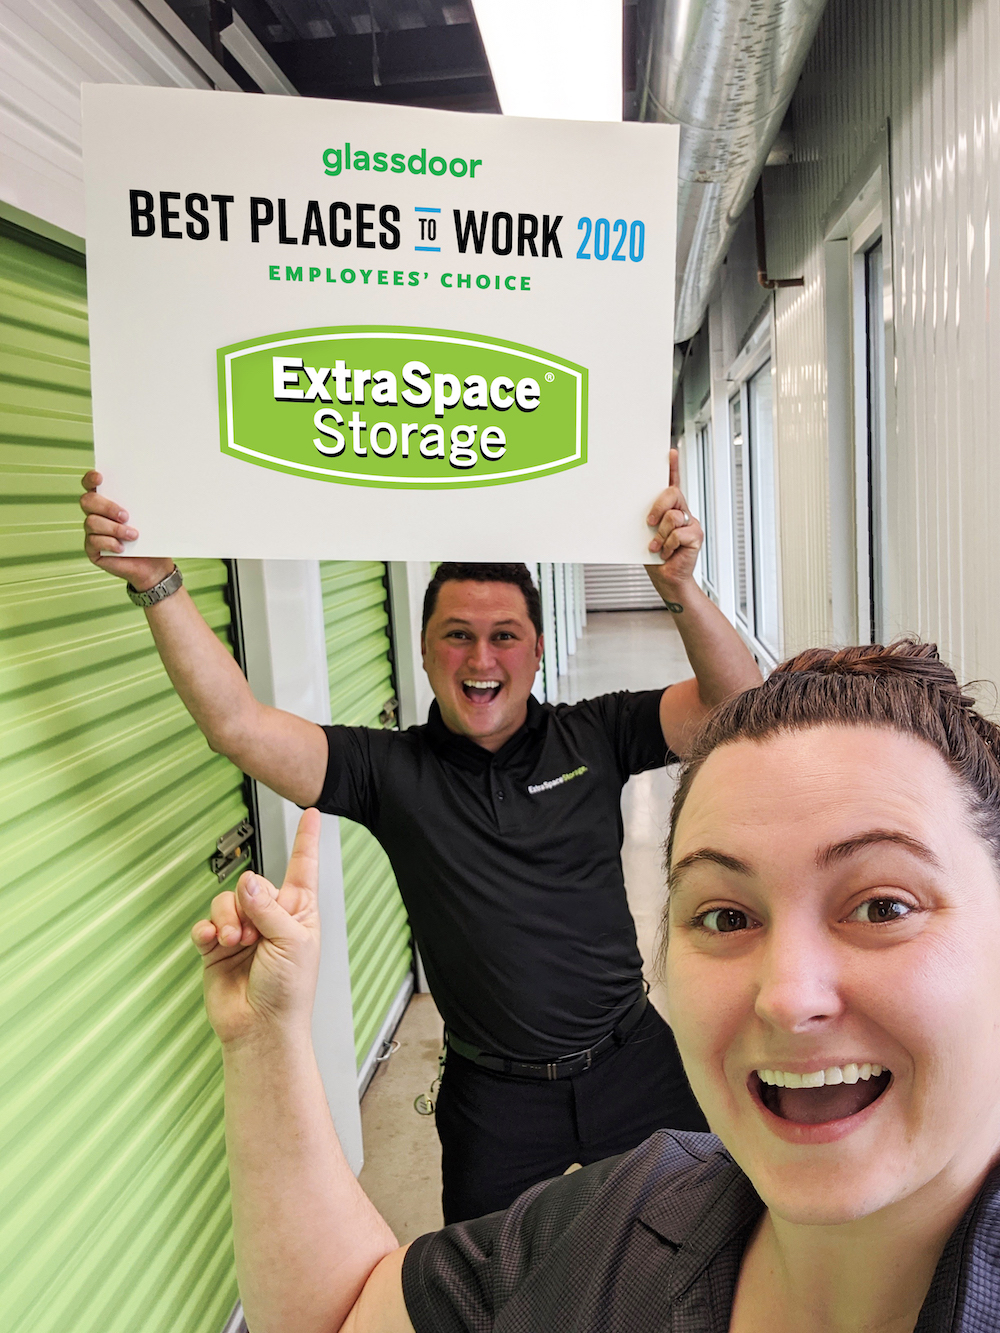 Extra Space Storage team members holding sign that says Glassdoor Best Places to Work 2020